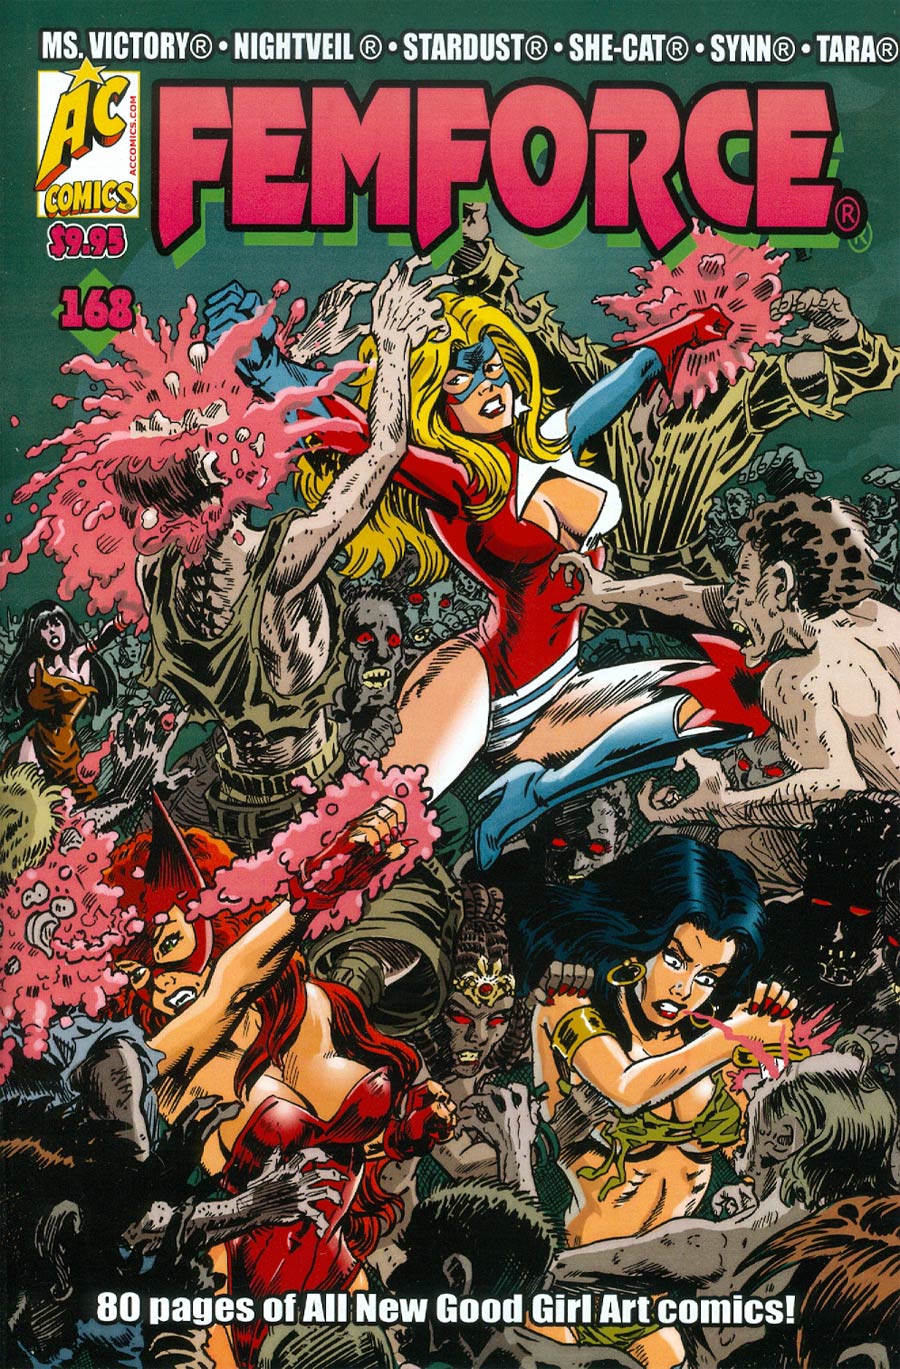 Femforce #168 Cover A Will Meugniot Zombie